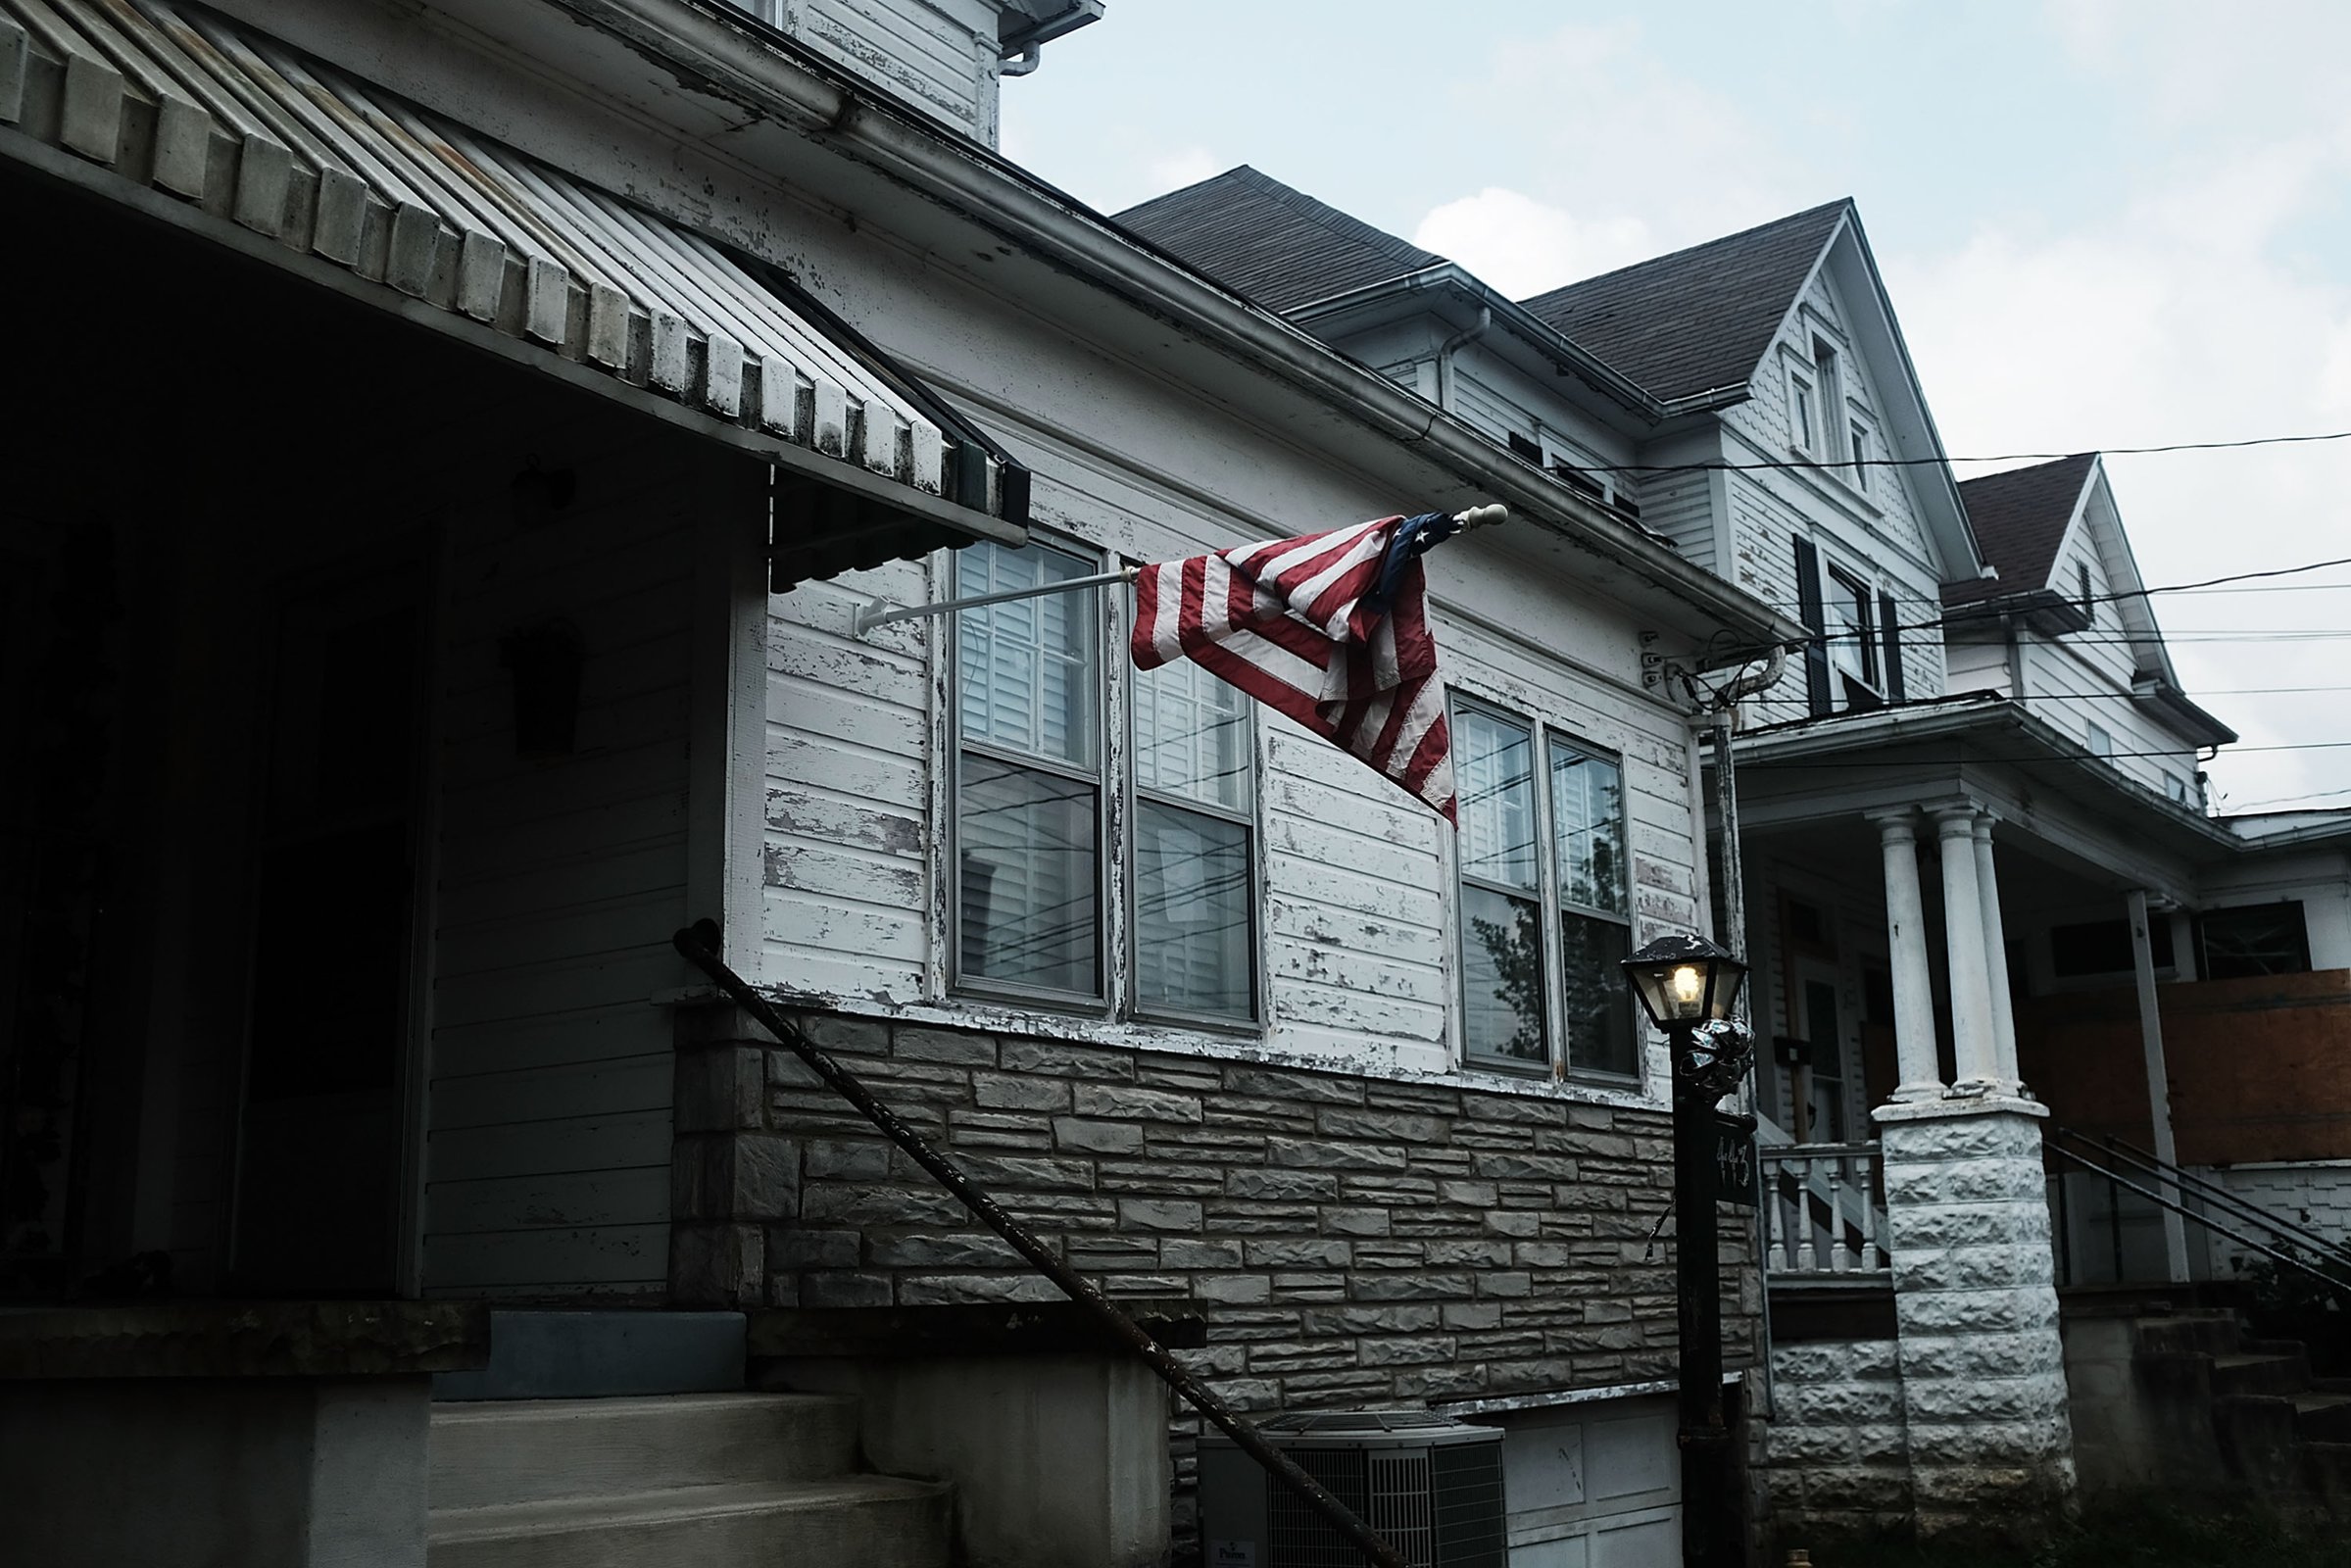 An American flag hangs outside of a home in Clarksburg, WV on Aug. 22, 2018, a state still struggling with endemic poverty and opioid abuse.